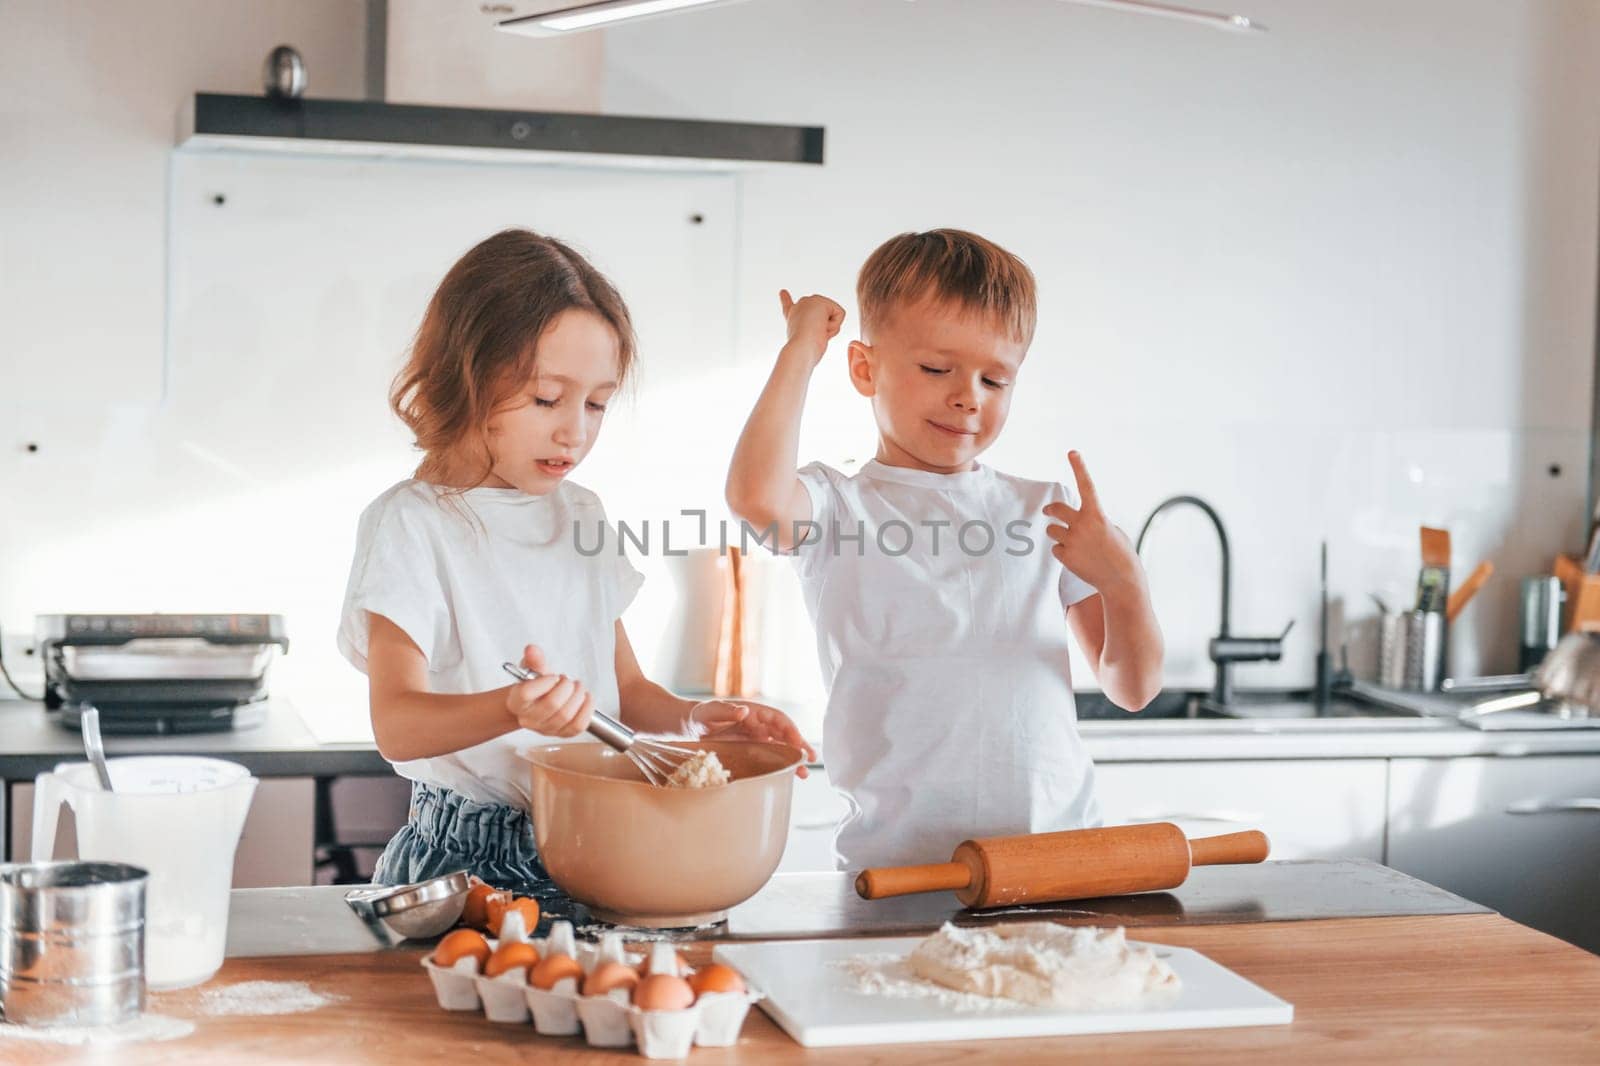 Preparing Christmas cookies. Little boy and girl on the kitchen.